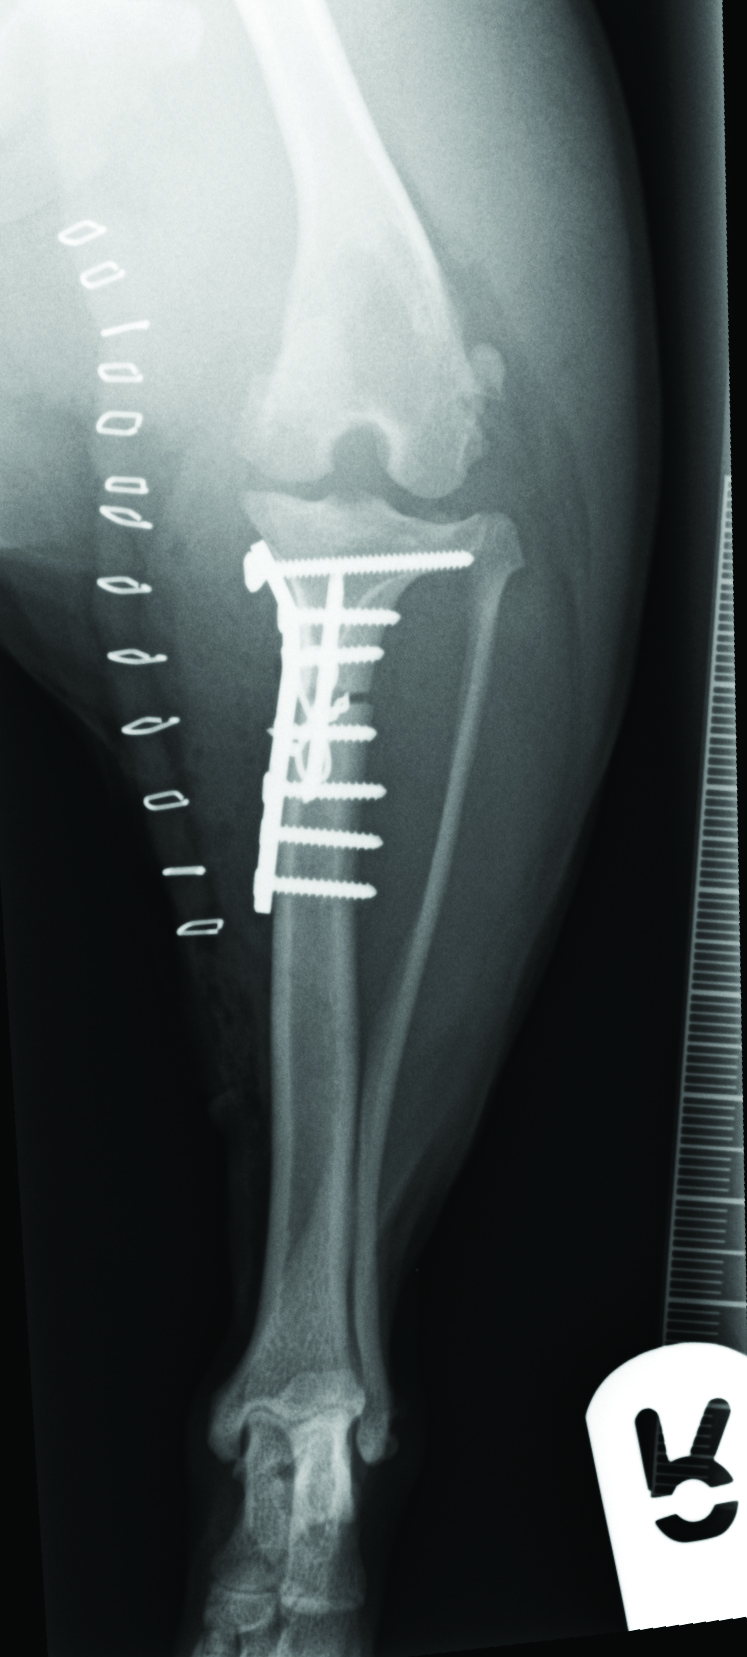 TPLO by Wedge Osteotomy